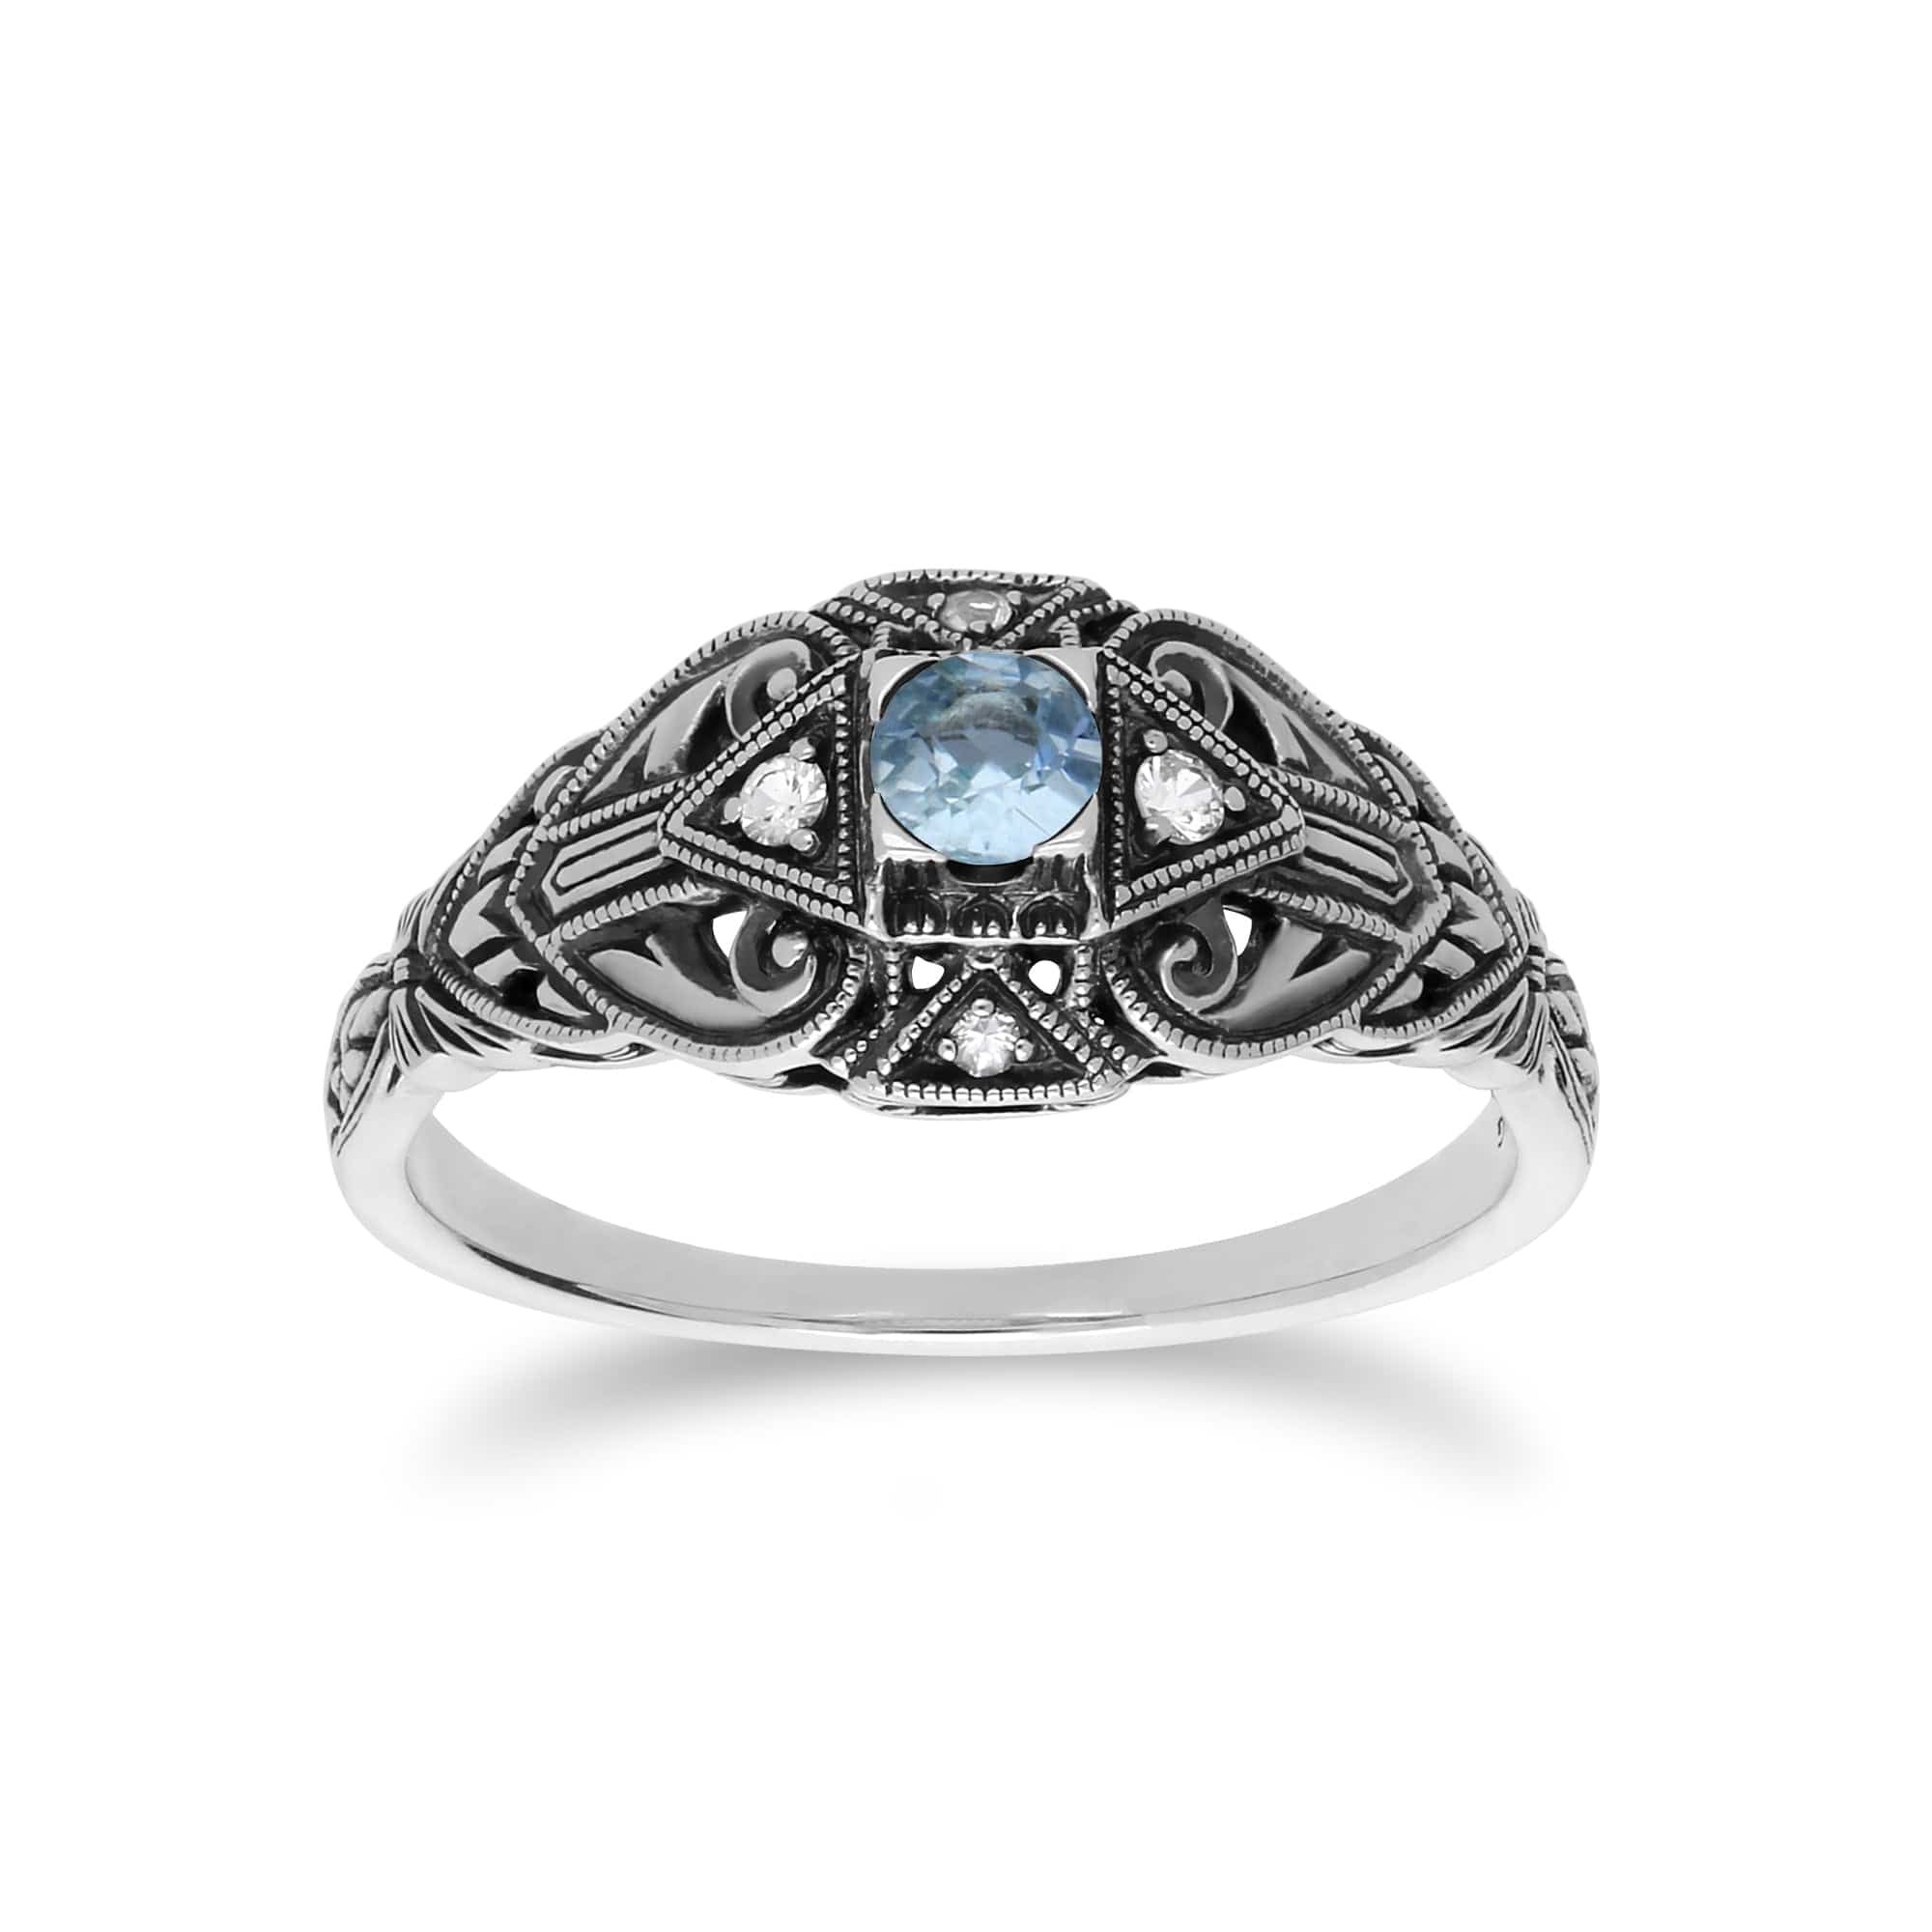 241R210303925 Art Deco Style Round Blue Topaz & White Topaz  Ring in 925 Sterling Silver 1